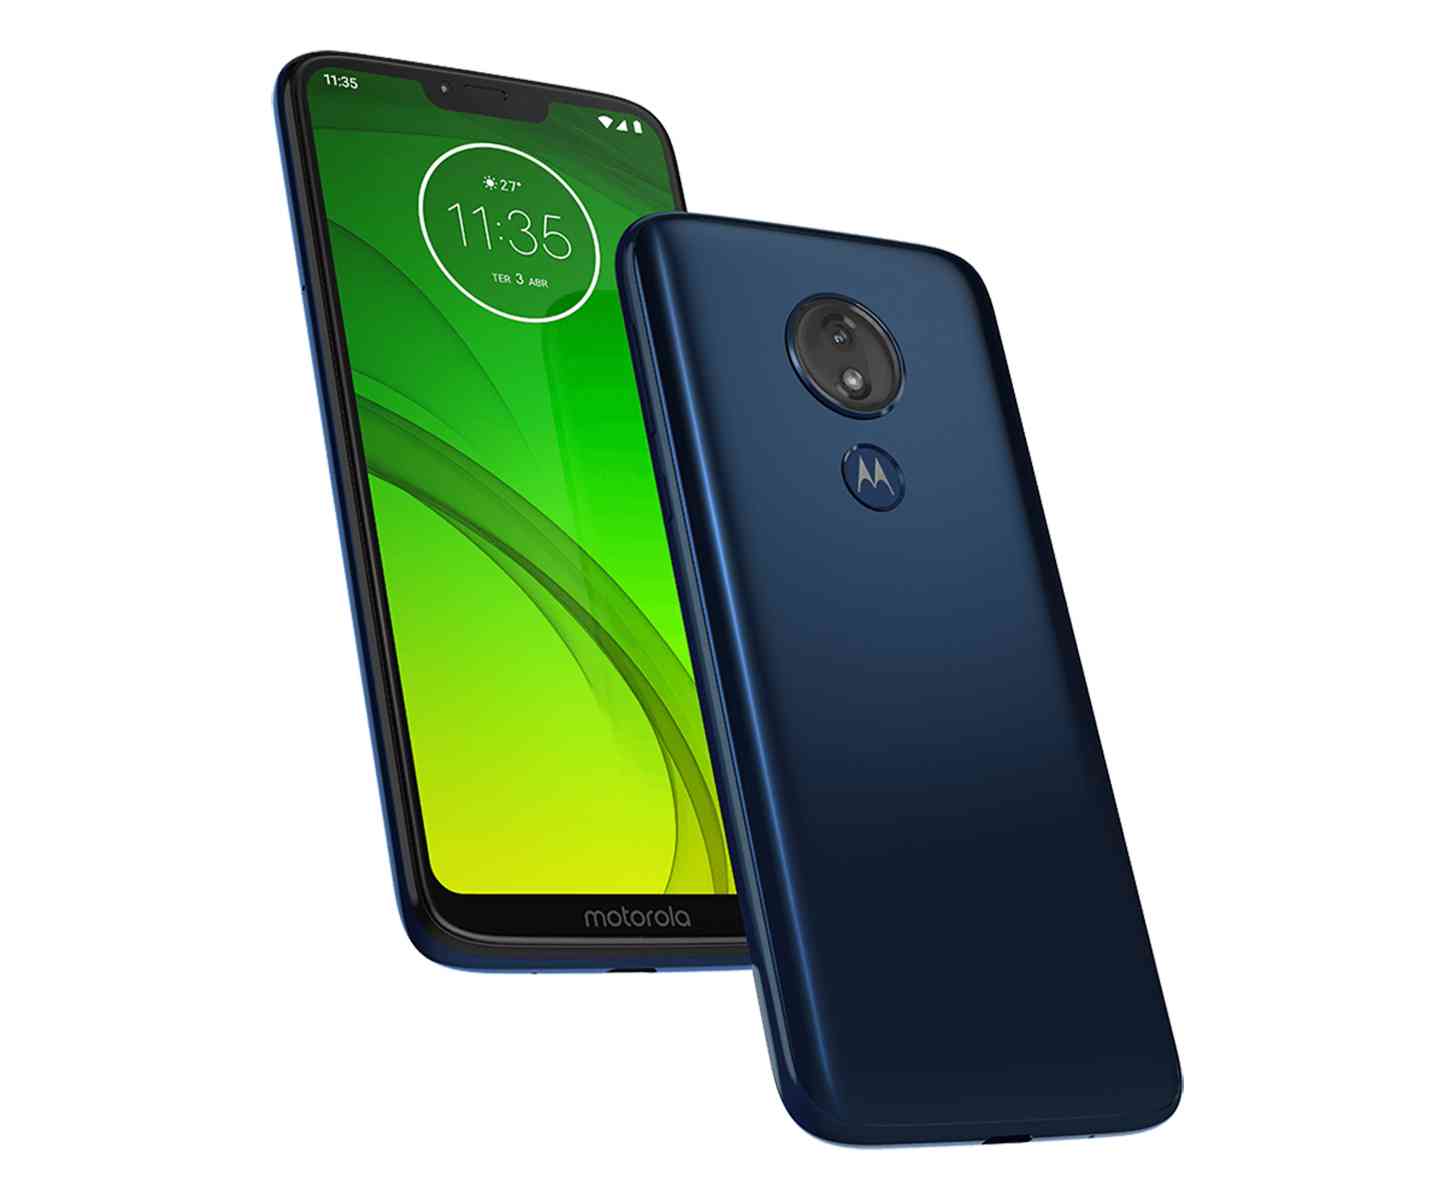 Moto G7, G7 Play, G7 Power, and G7 Plus shown off in